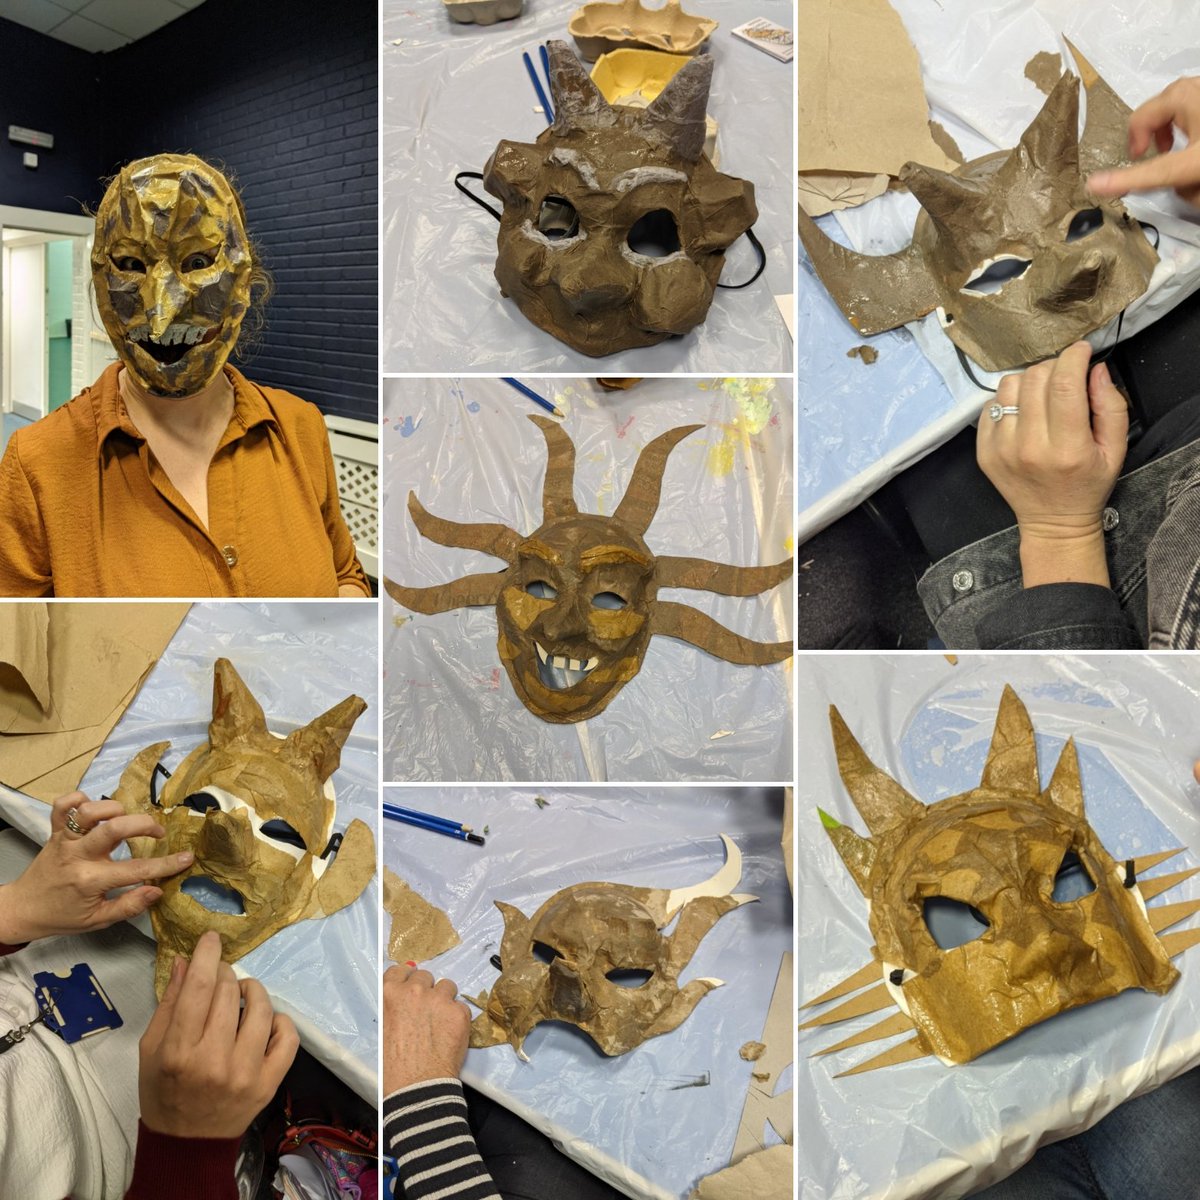 Midweek #history themed #artworkshops for @ArtsPrimary #teachingteachers. Busy morning #printing #suffragette #posters and an afternoon of #gargoyle #maskmaking using #recycledmaterials. #hpan #stepbackintime #inset #workshops #reliefprint #print #masks